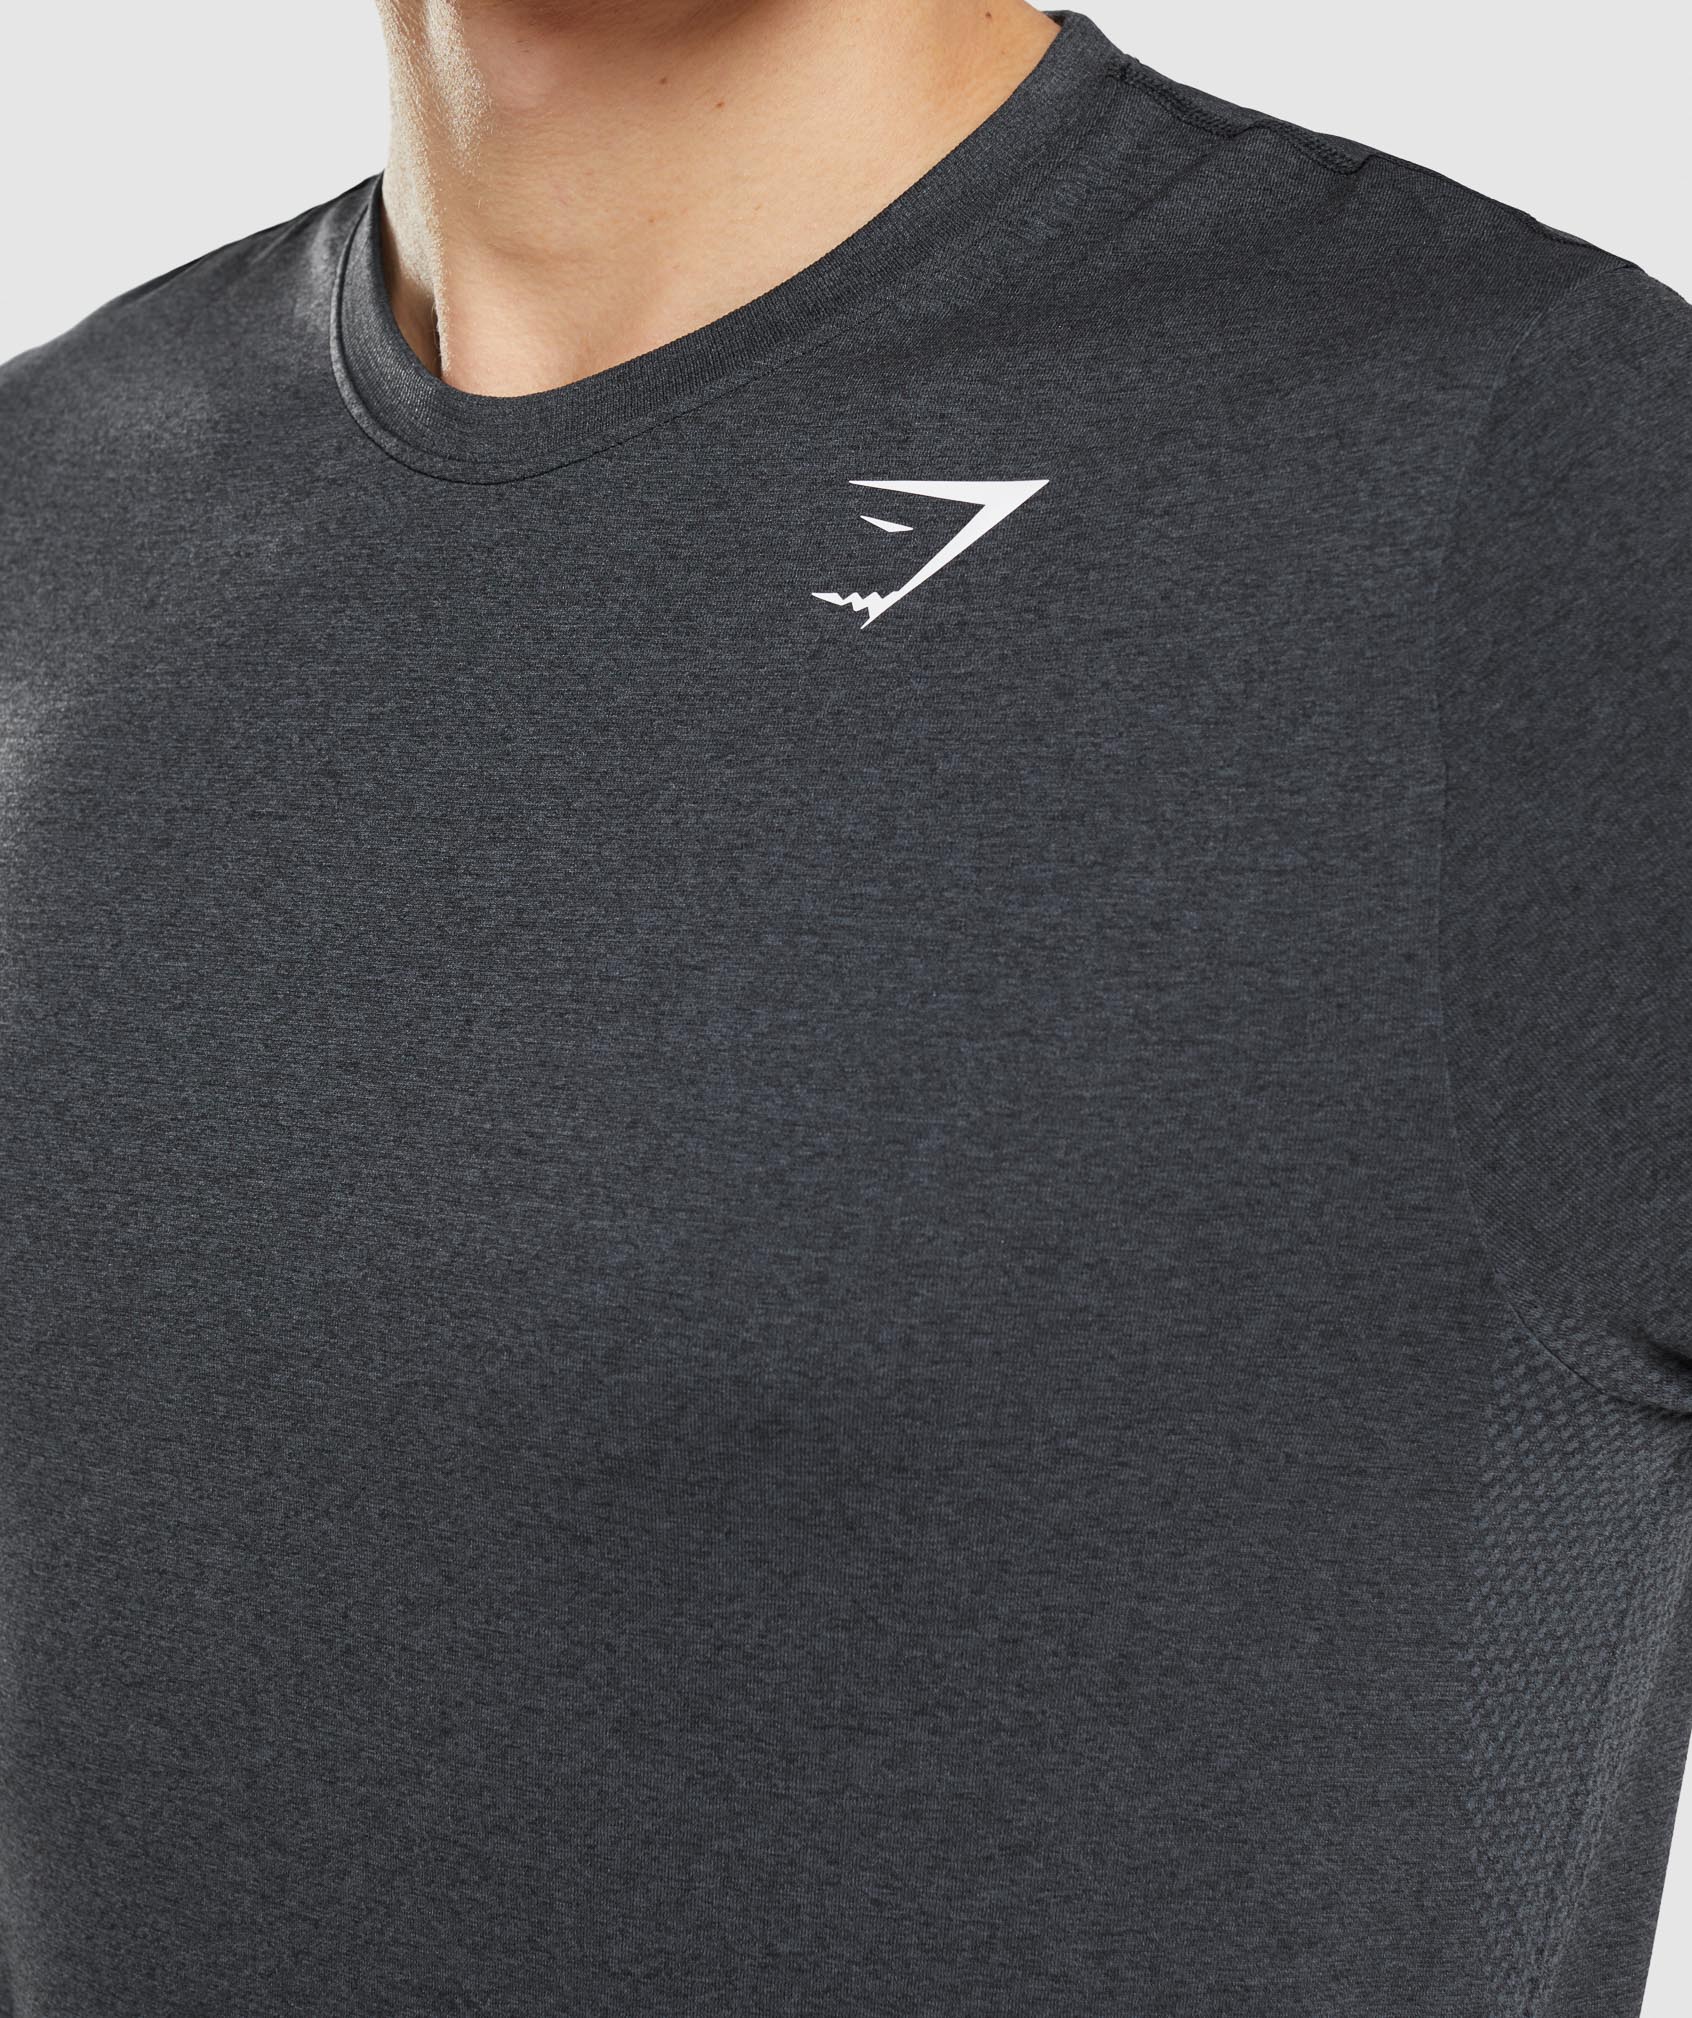 Arrival Seamless T-Shirt in Black Marl